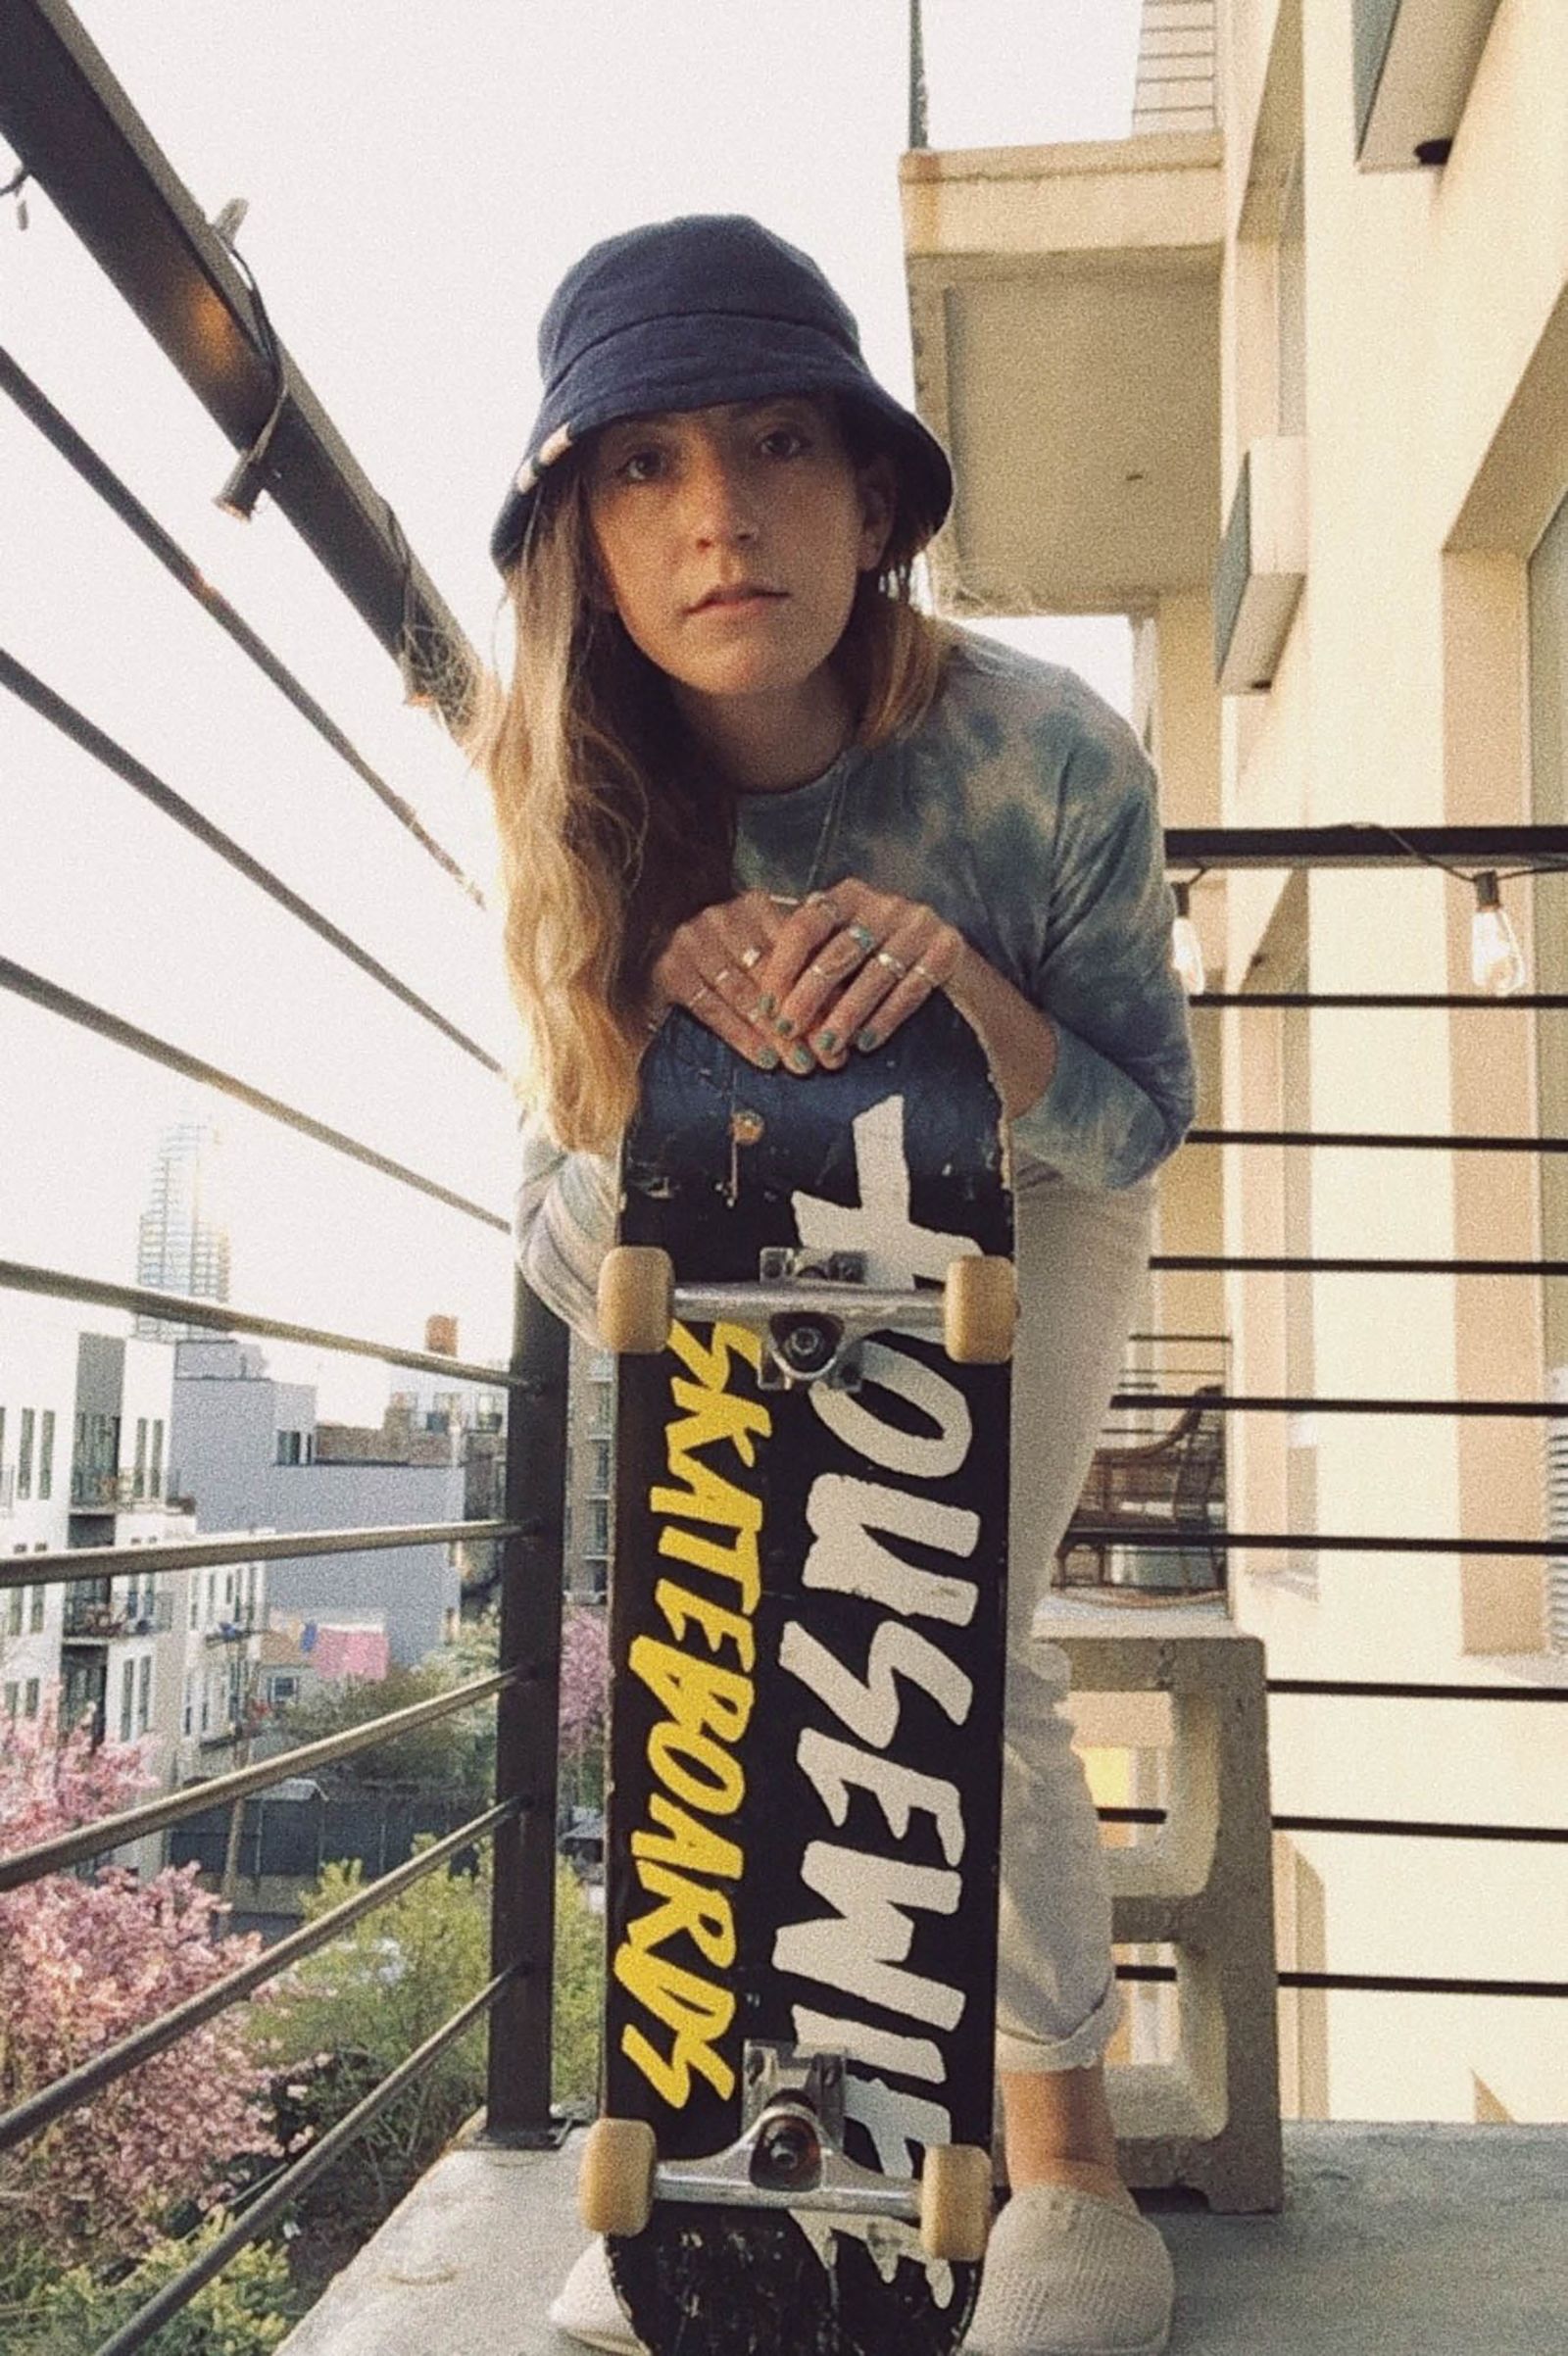 SK8 the Infinity Dub Makes Room for Nonbinary Skaters